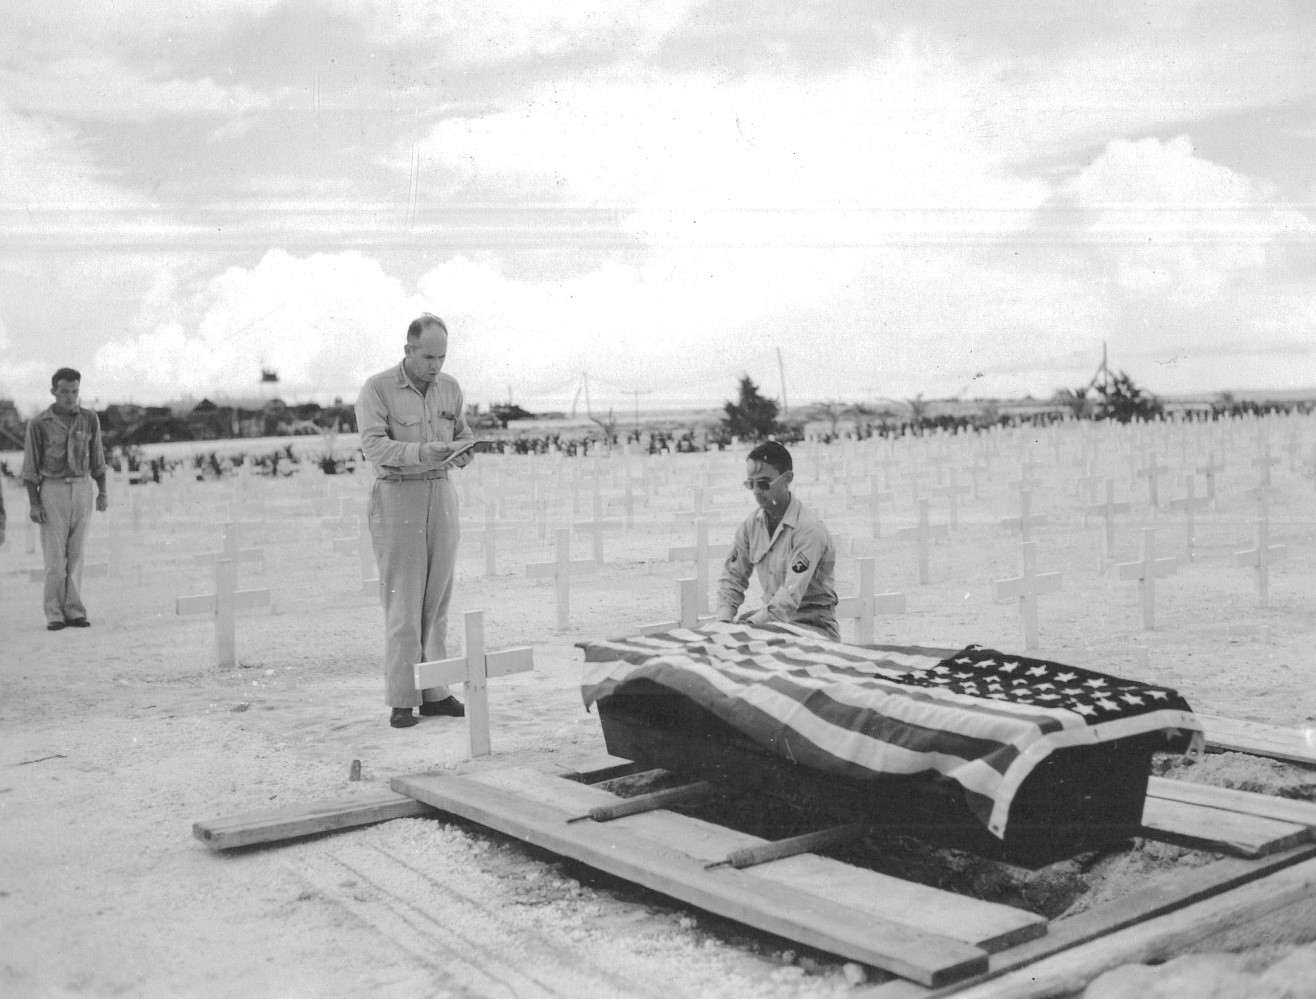 Funeral of one of the four crew who died after rescue, at U.S. Army Forces (USAF) cemetery, Peleliu. C.D. Denham, ChC USNR officiating. 6 August 1945. The remains of all four crew who died after rescue were repatriated to the United States. S2c Ralph Peterson is the only one buried in a national cemetery—Fort Snelling National Cemetery, MN, SECTION C-24, SITE 13541. (National Archives)